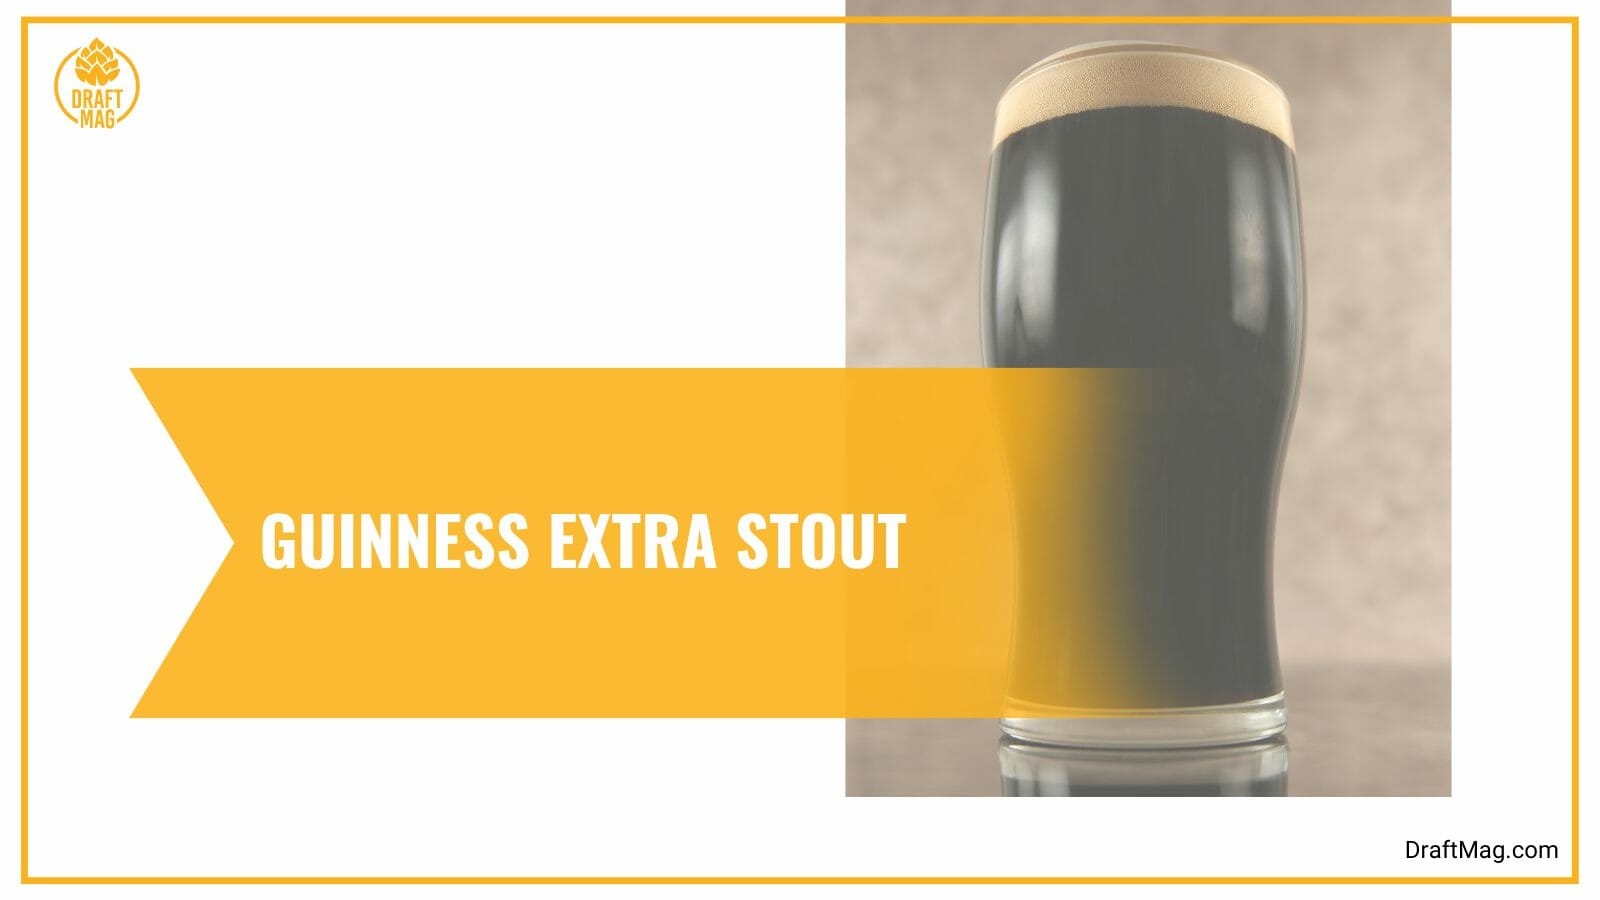 Guinness extra stout